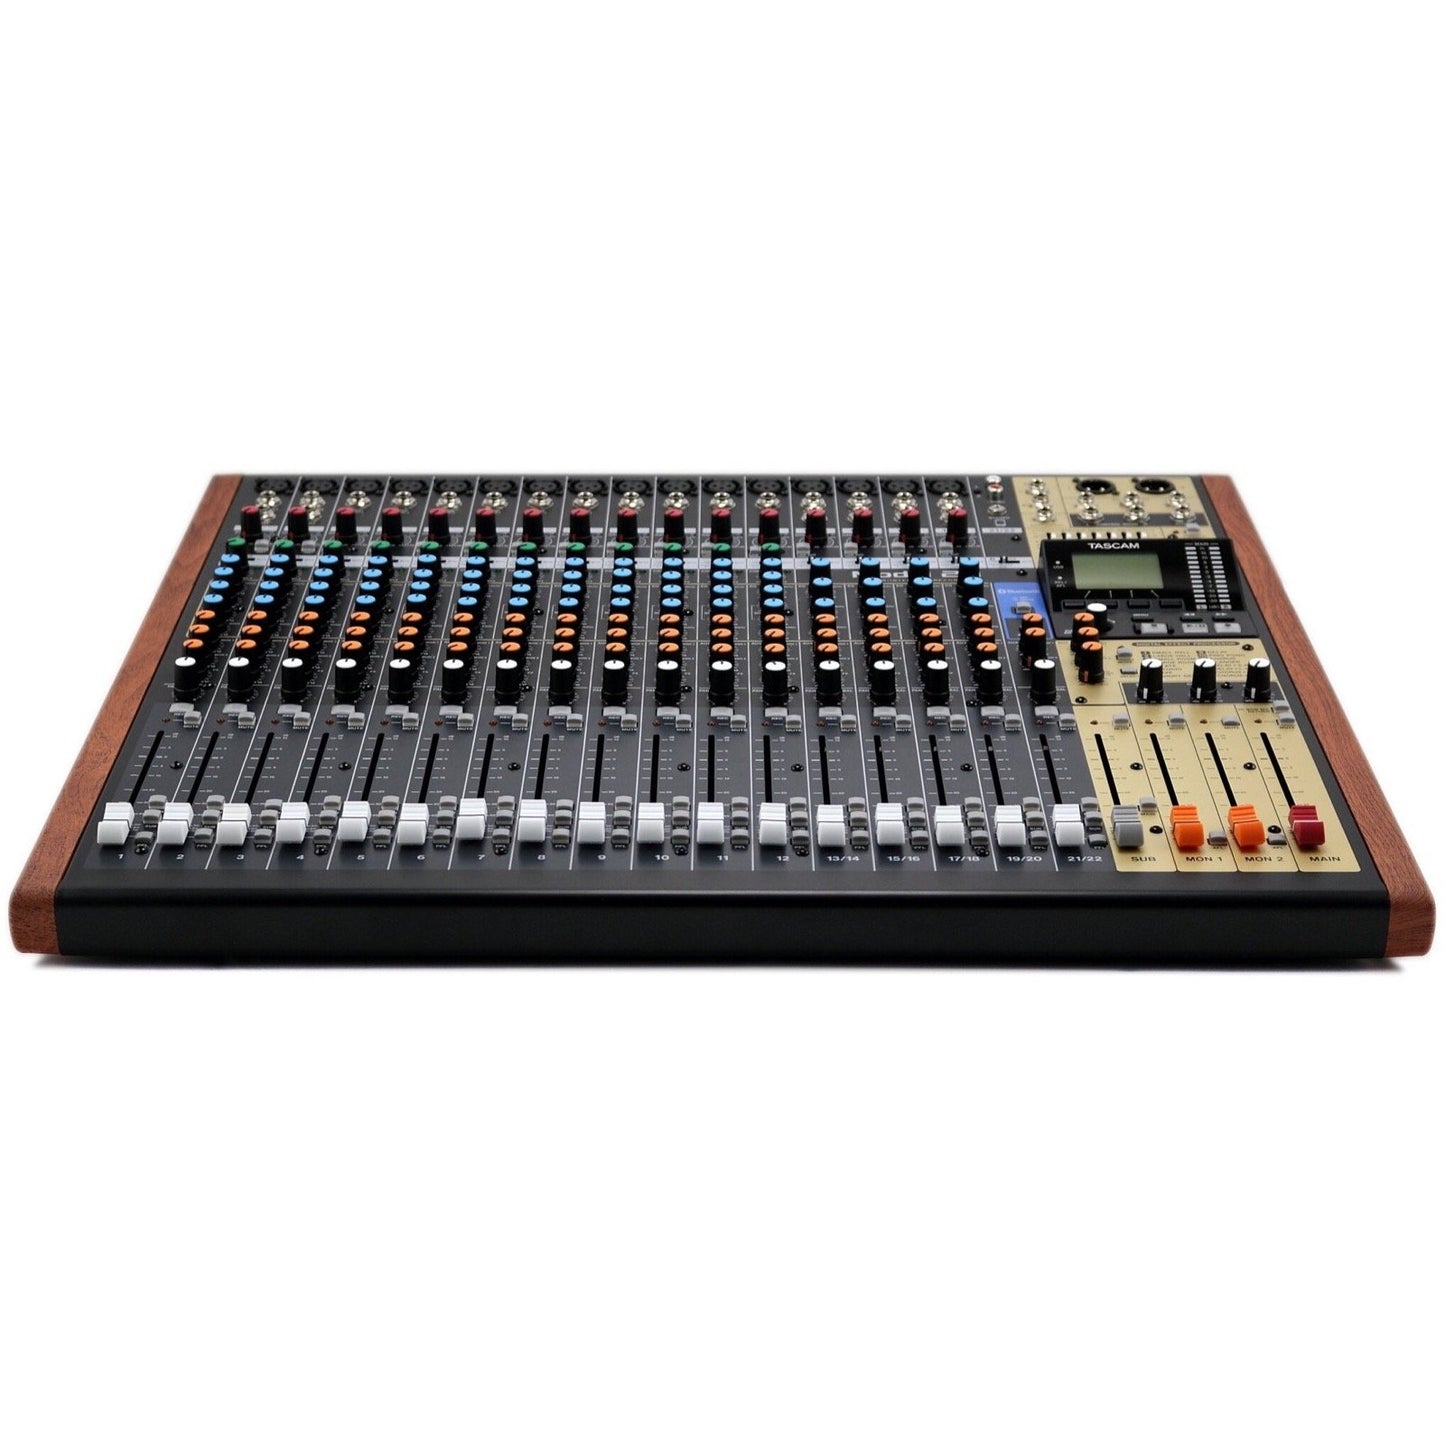 Tascam Model 24 Mixer, USB Audio Interface and Multitrack Recorder